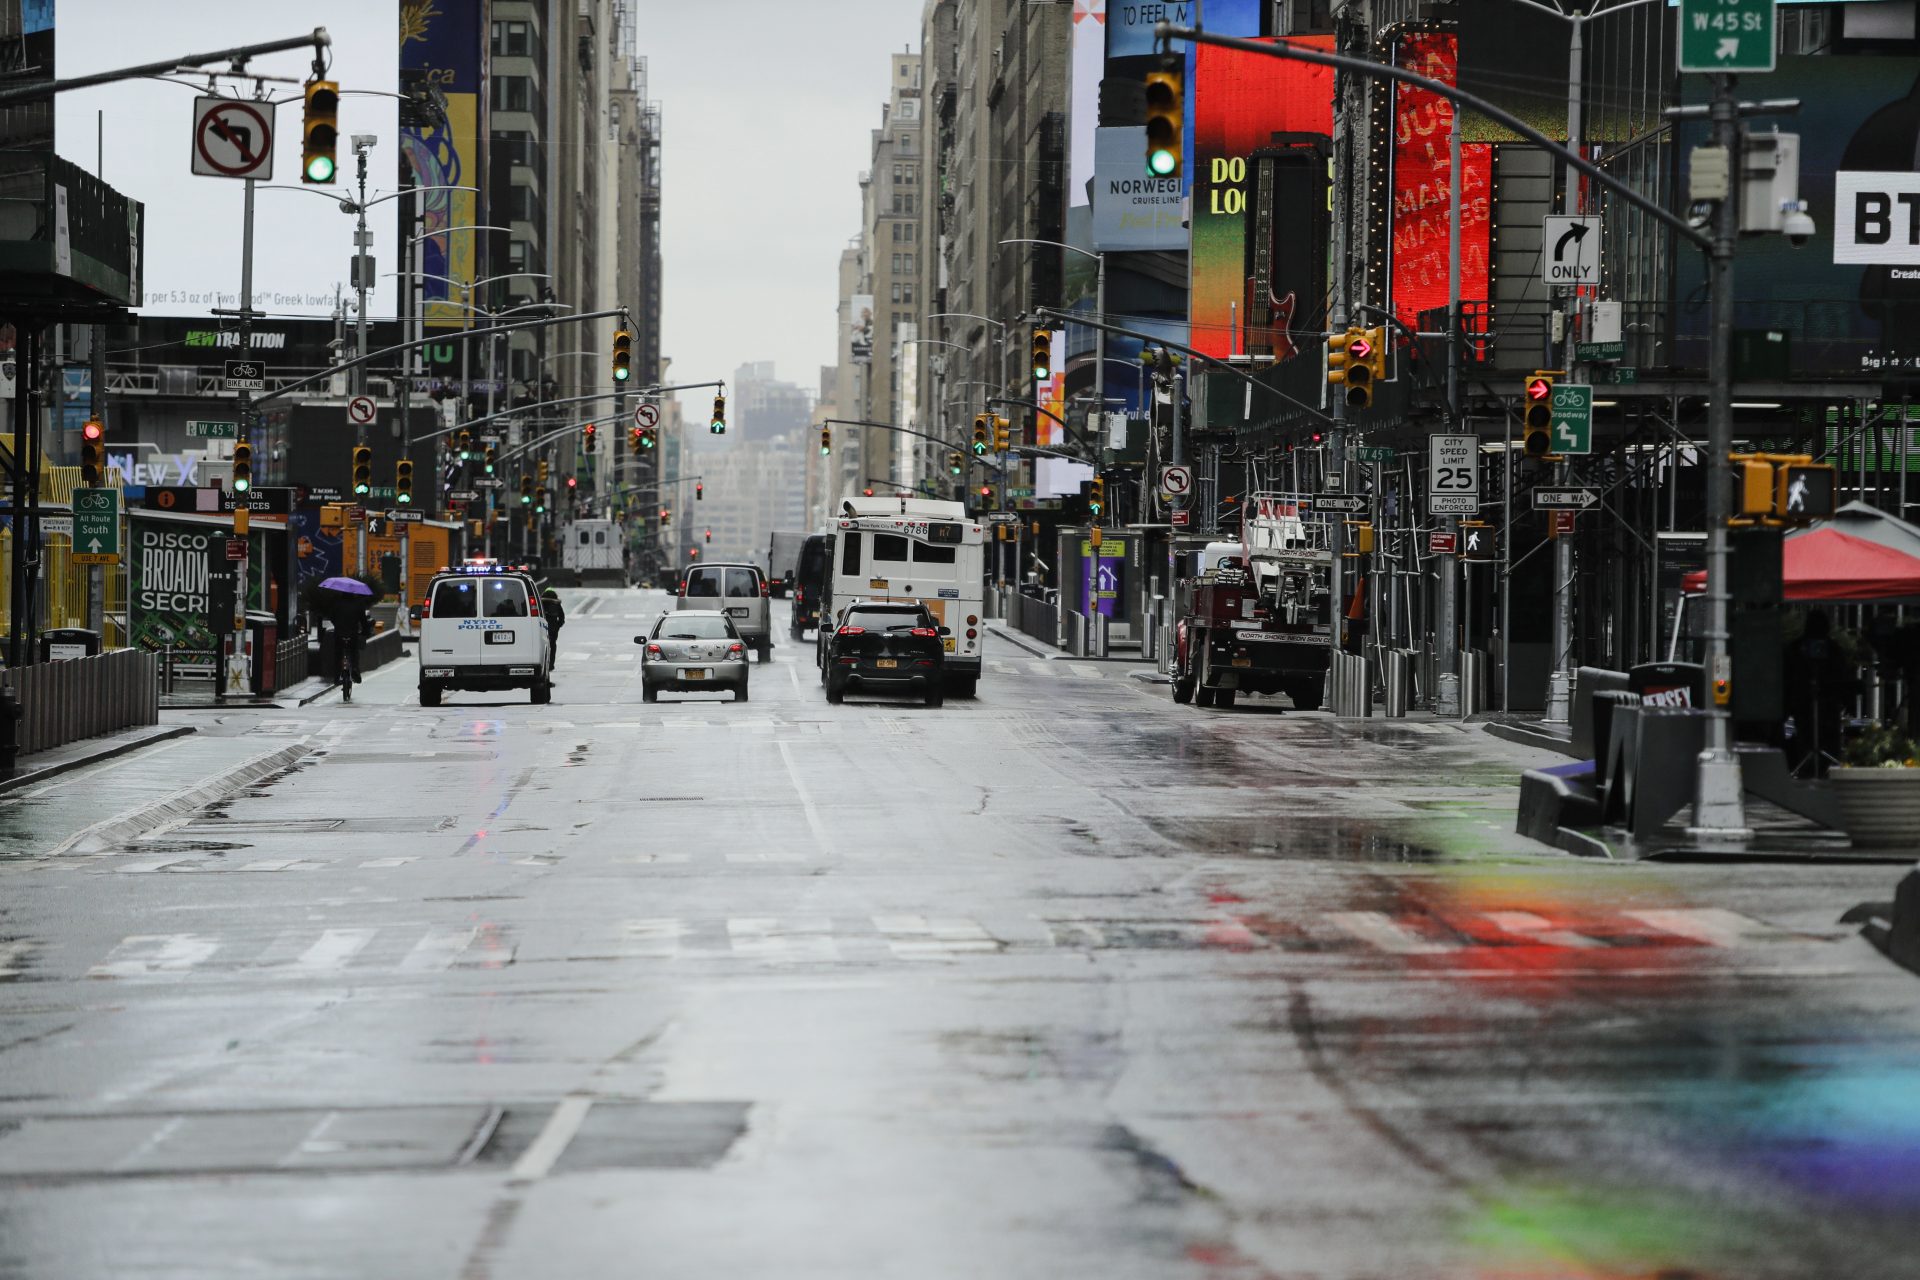 Cars drive down a mostly empty Seventh Avenue during the coronavirus outbreak Friday, April 3, 2020, in New York's Times Square. The new coronavirus causes mild or moderate symptoms for most people, but for some, especially older adults and people with existing health problems, it can cause more severe illness or death.